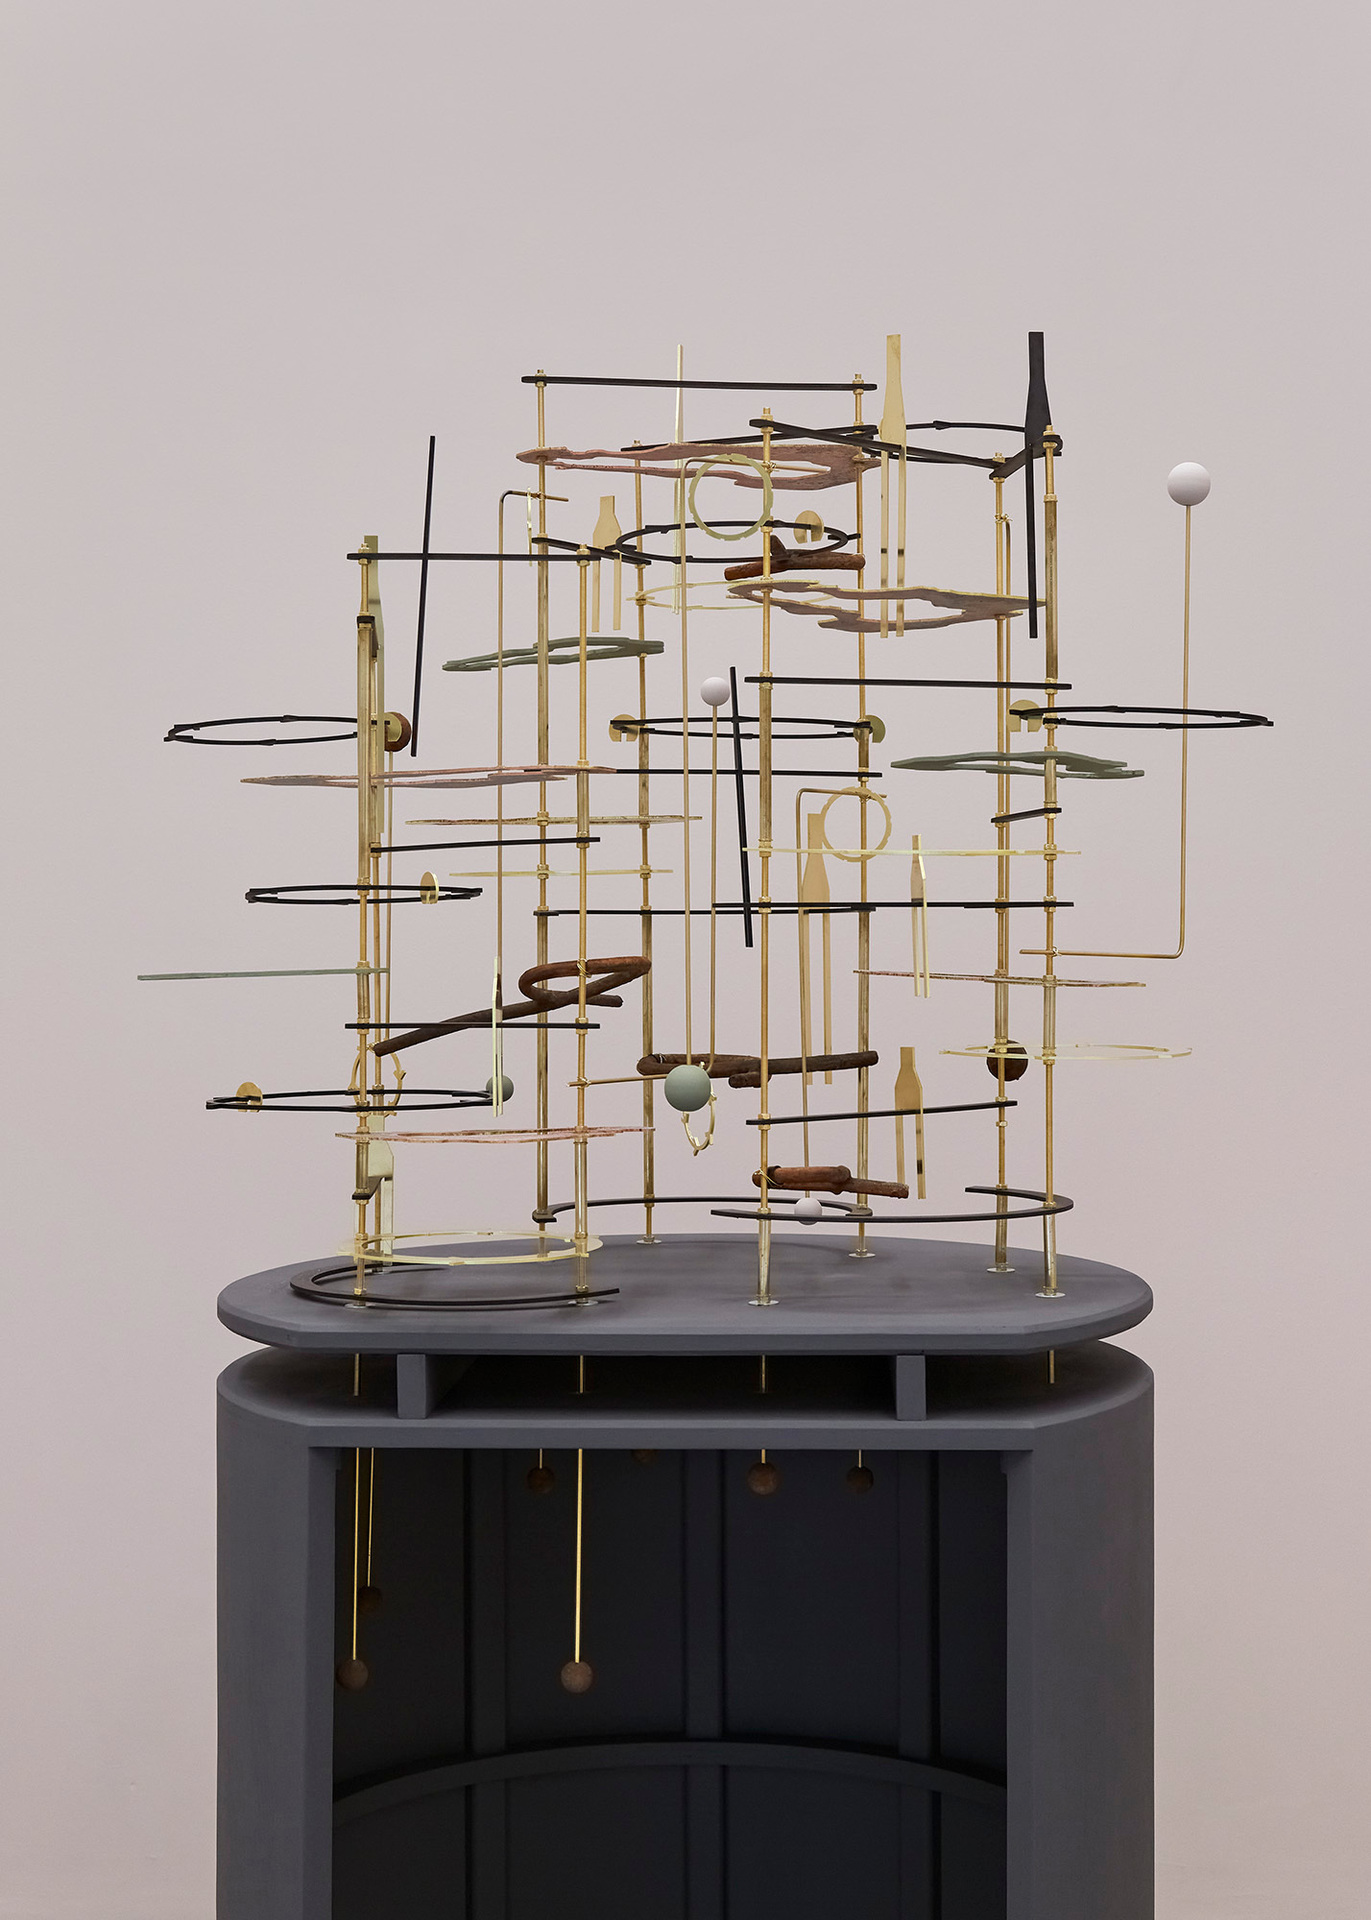 Claire Baily, The right time and place, 2022, Plywood, mdf, brass, household paint, wire, iron powder, 180 x 70 x 60 cm